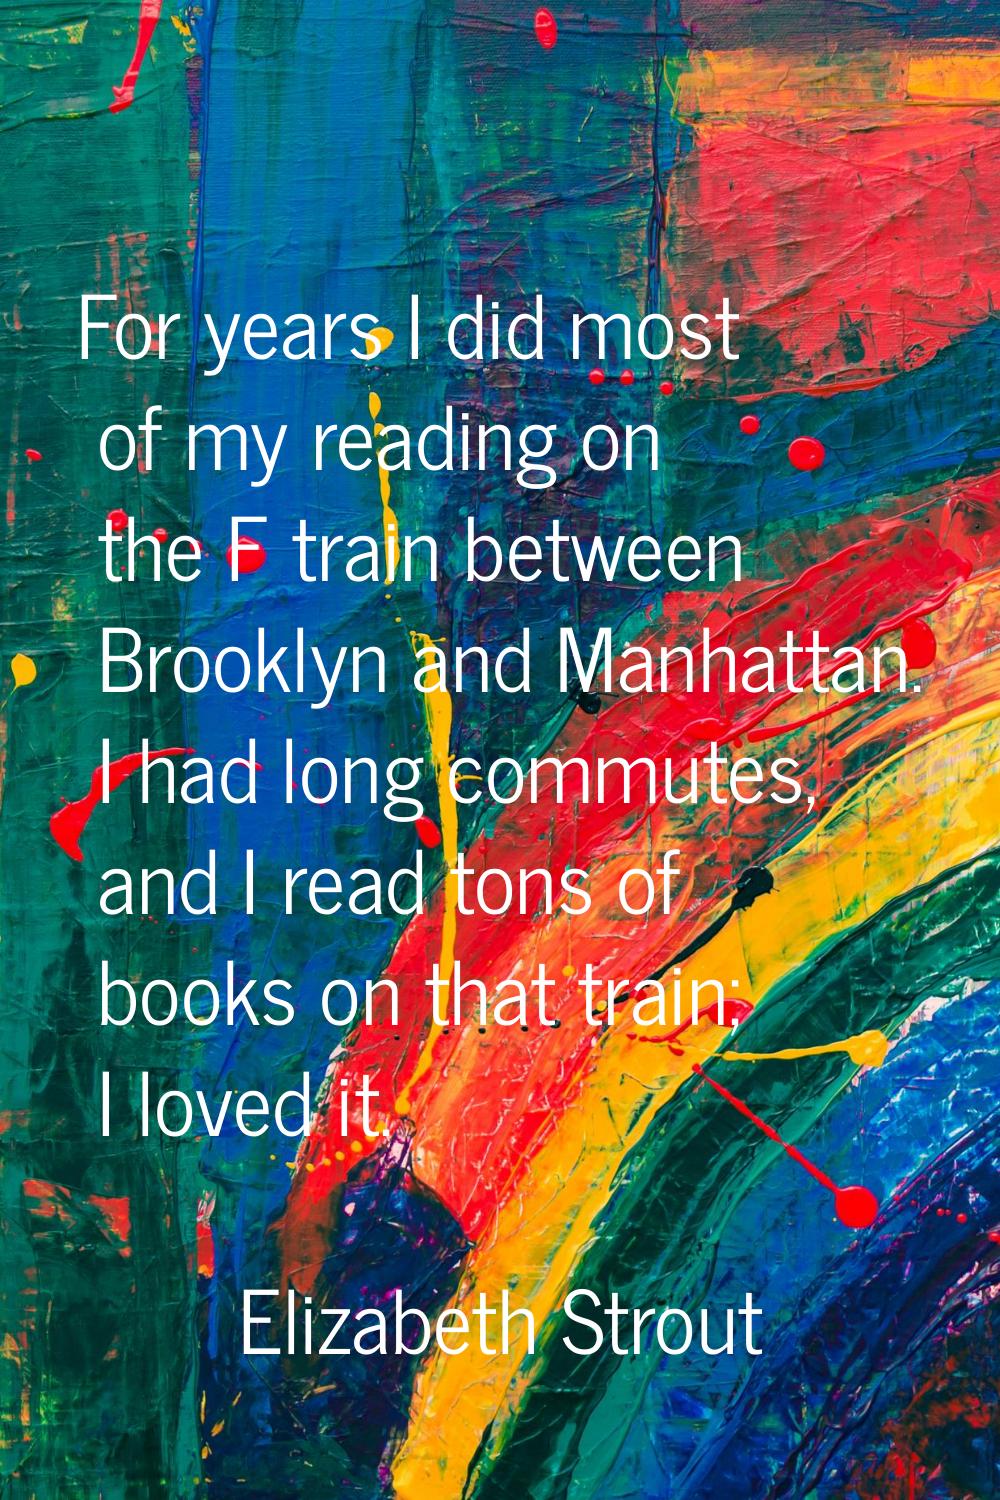 For years I did most of my reading on the F train between Brooklyn and Manhattan. I had long commut